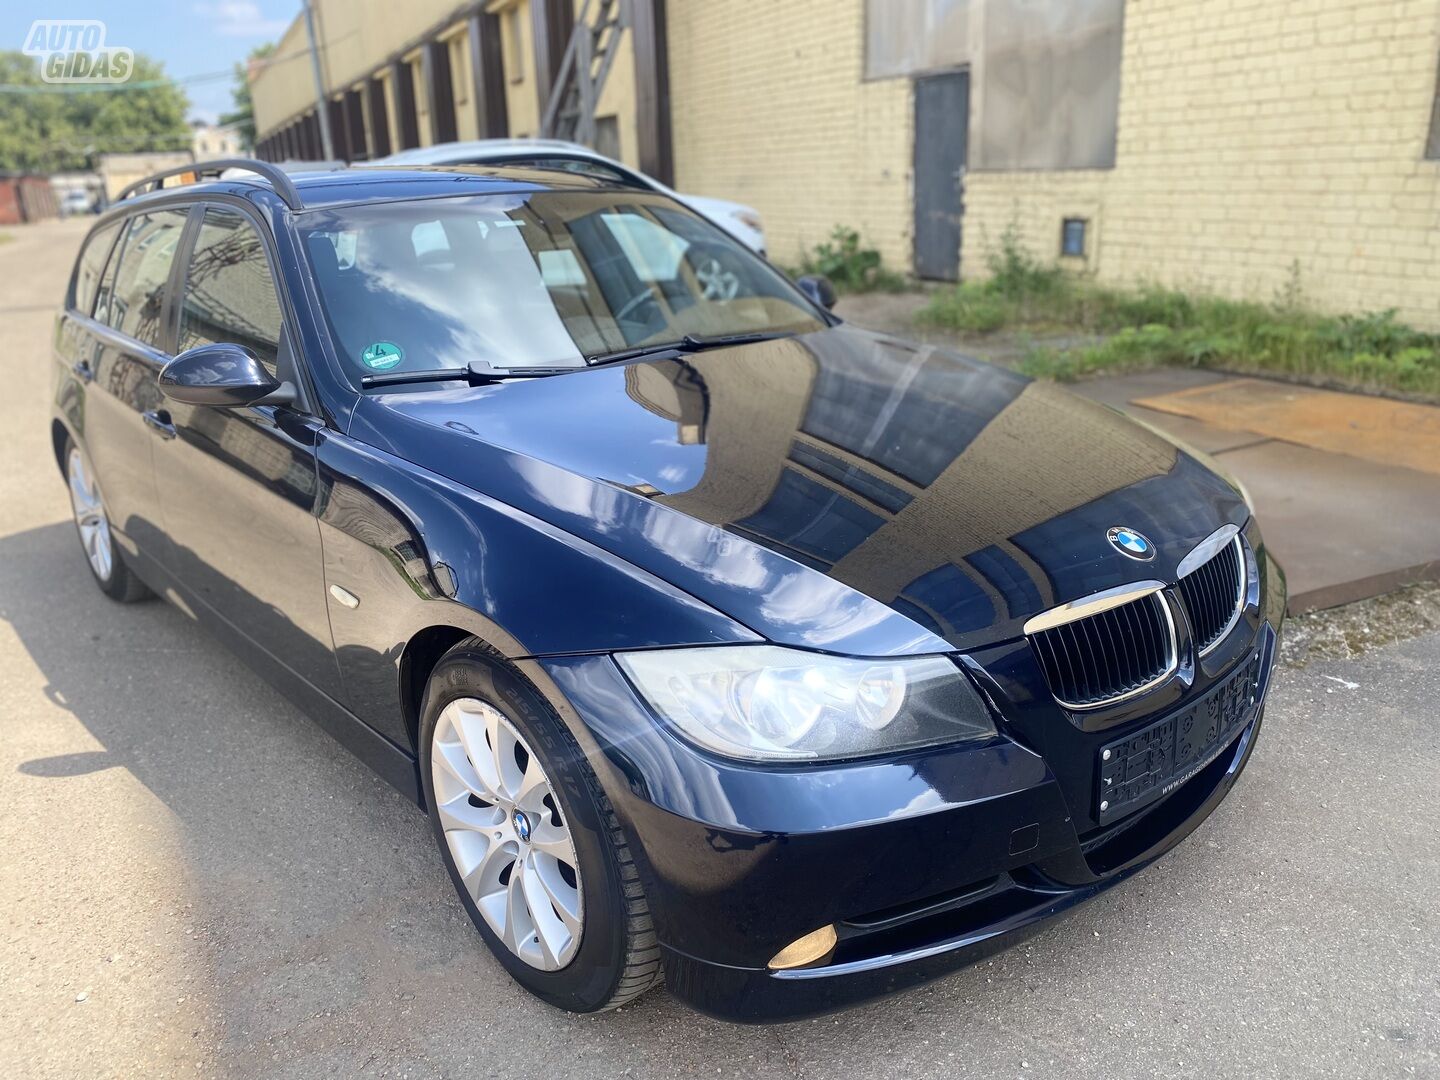 Bmw 320 d Touring 2008 y